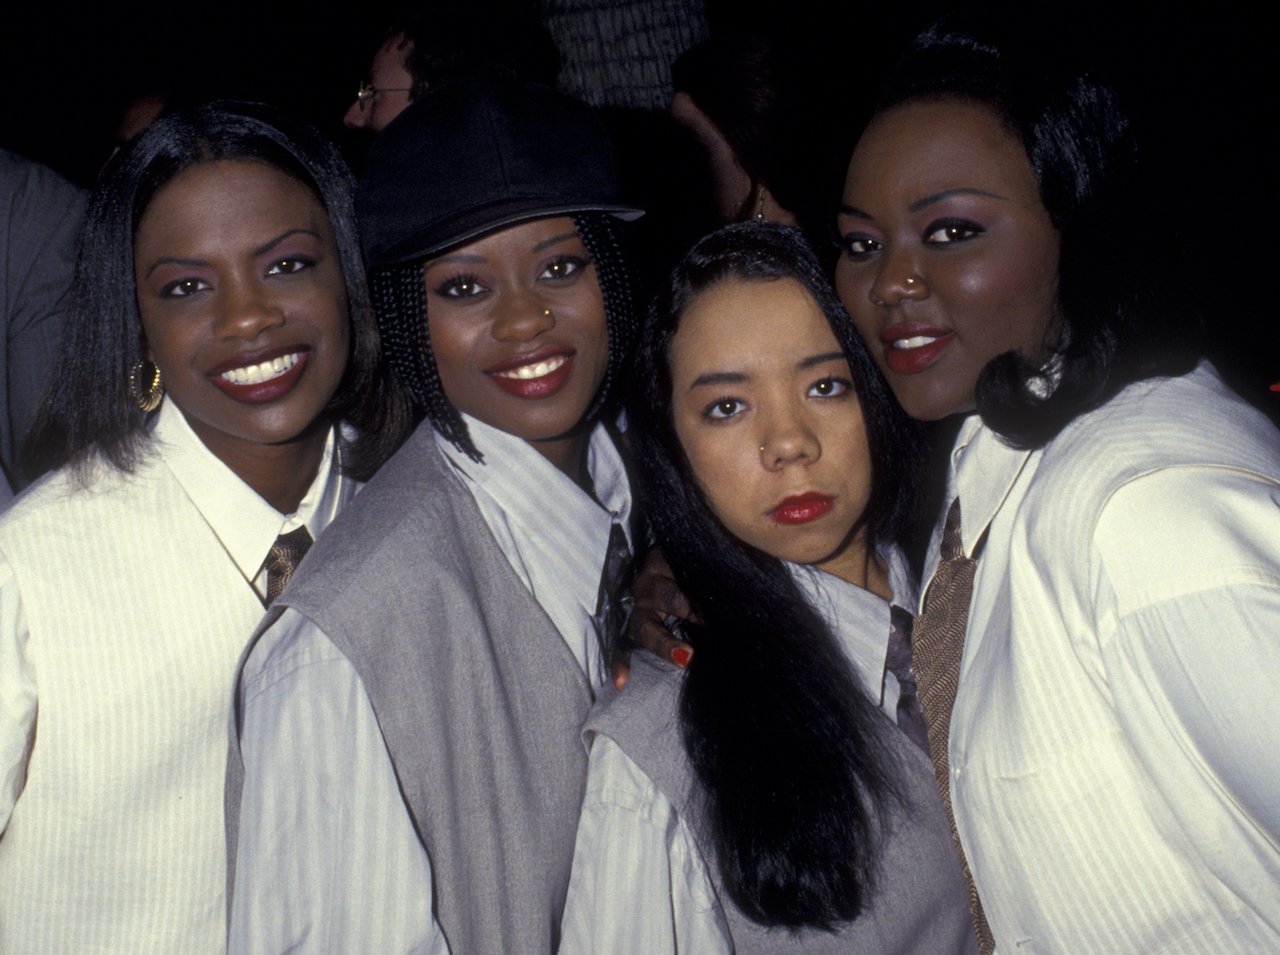 XSCAPE poses together during event. Kandi Burruss says the group's split forced her to think of other business ventures.